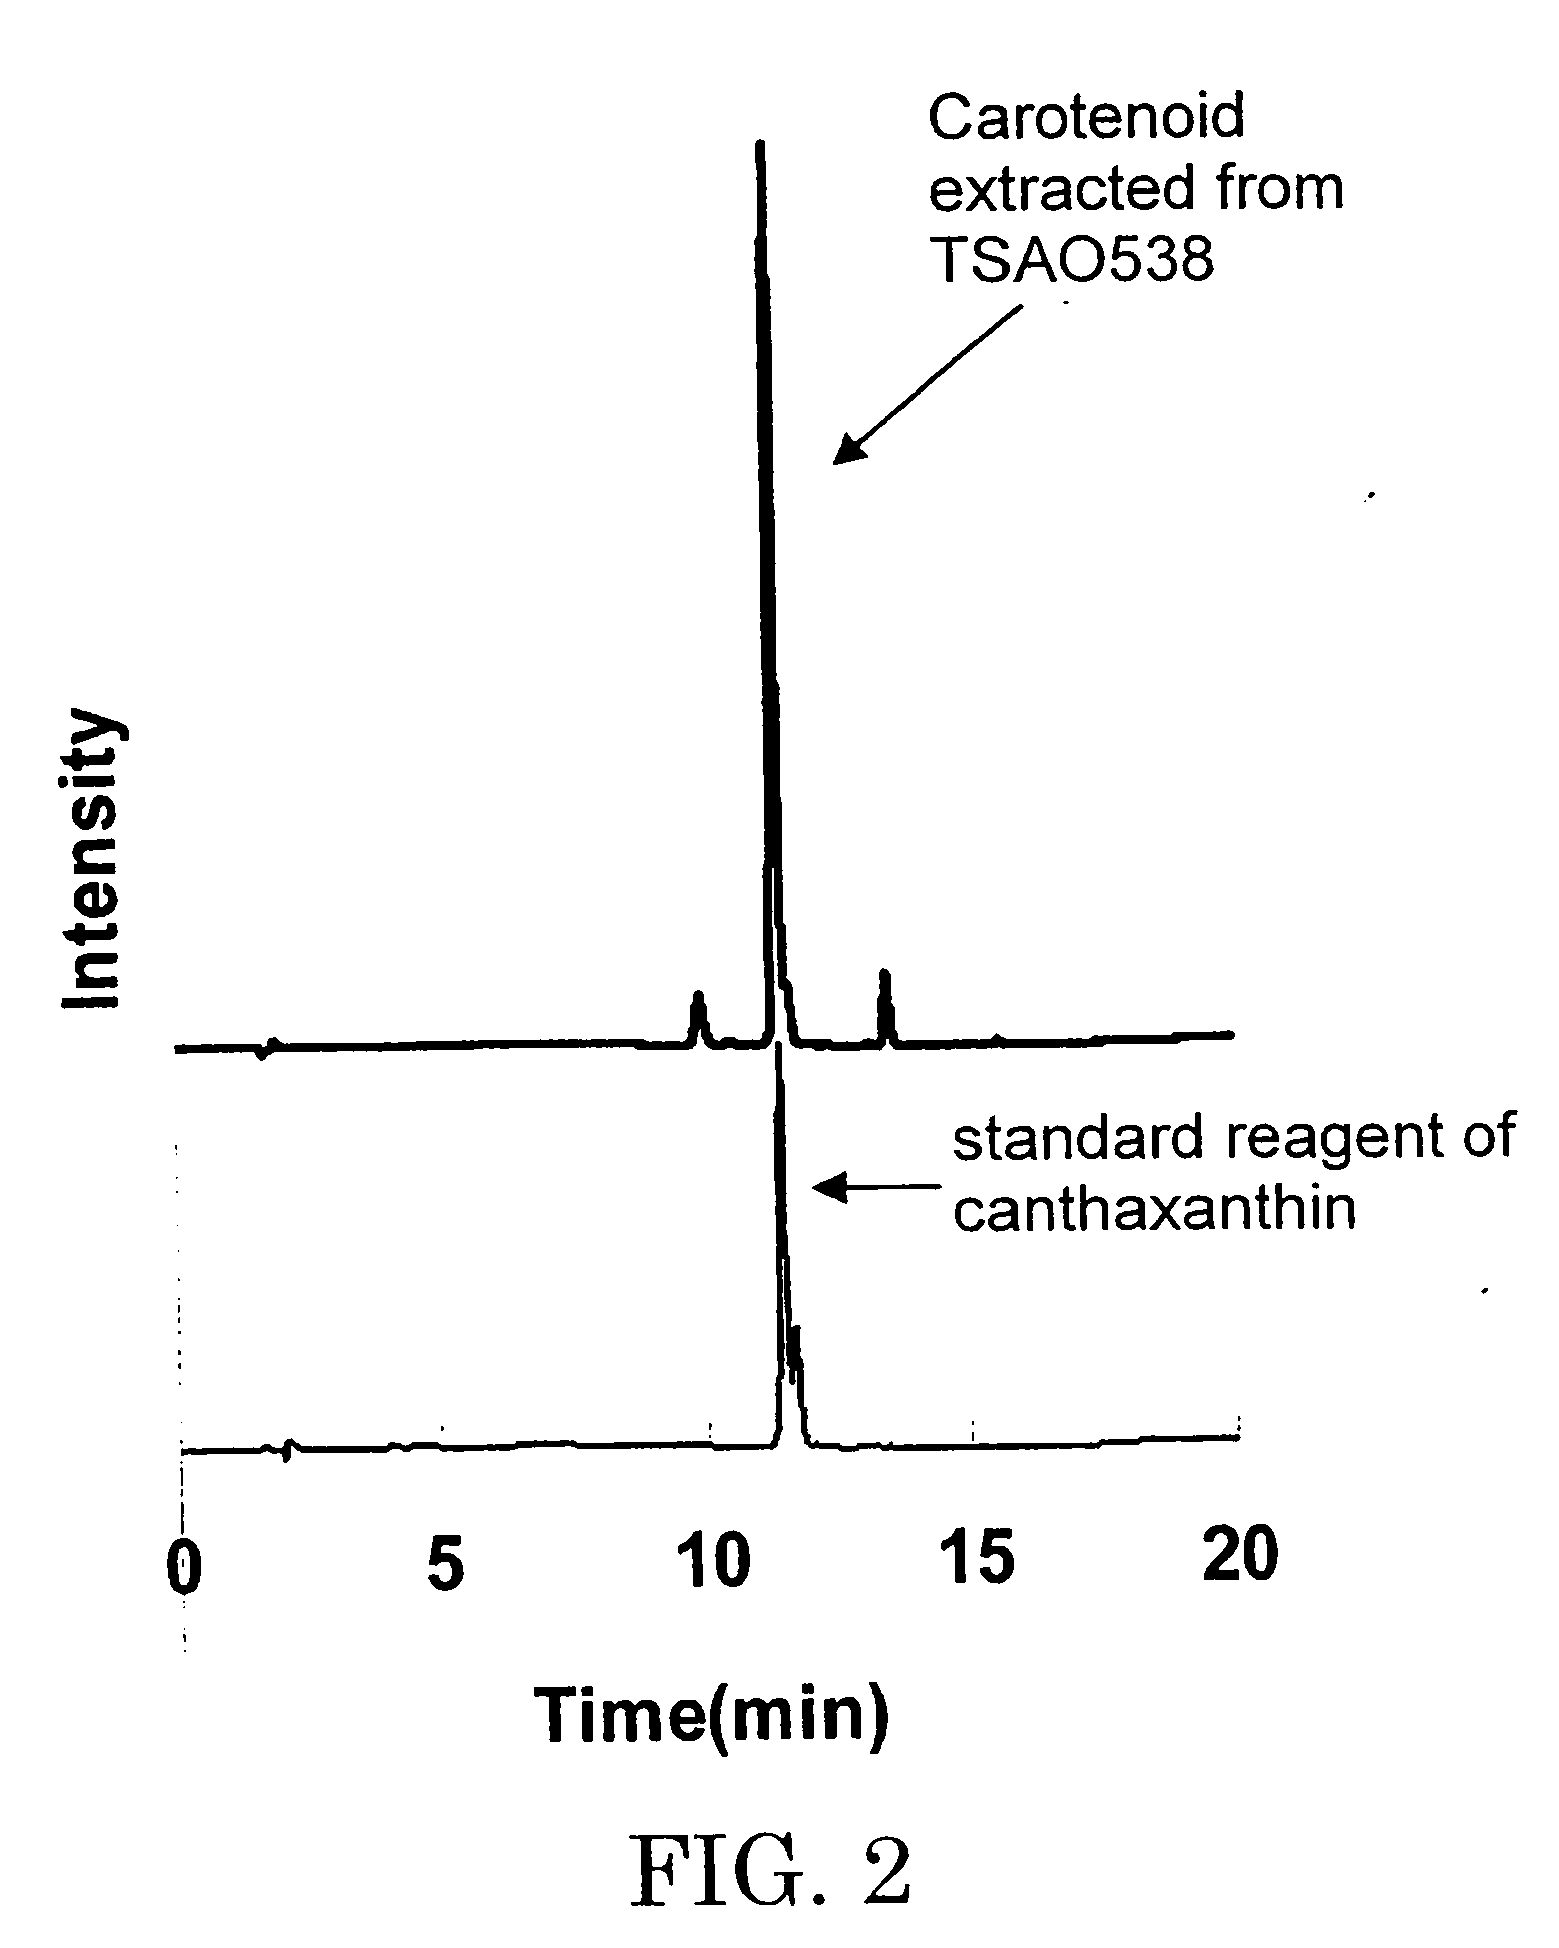 Novel microorganism and method for producing carotenoid using the same